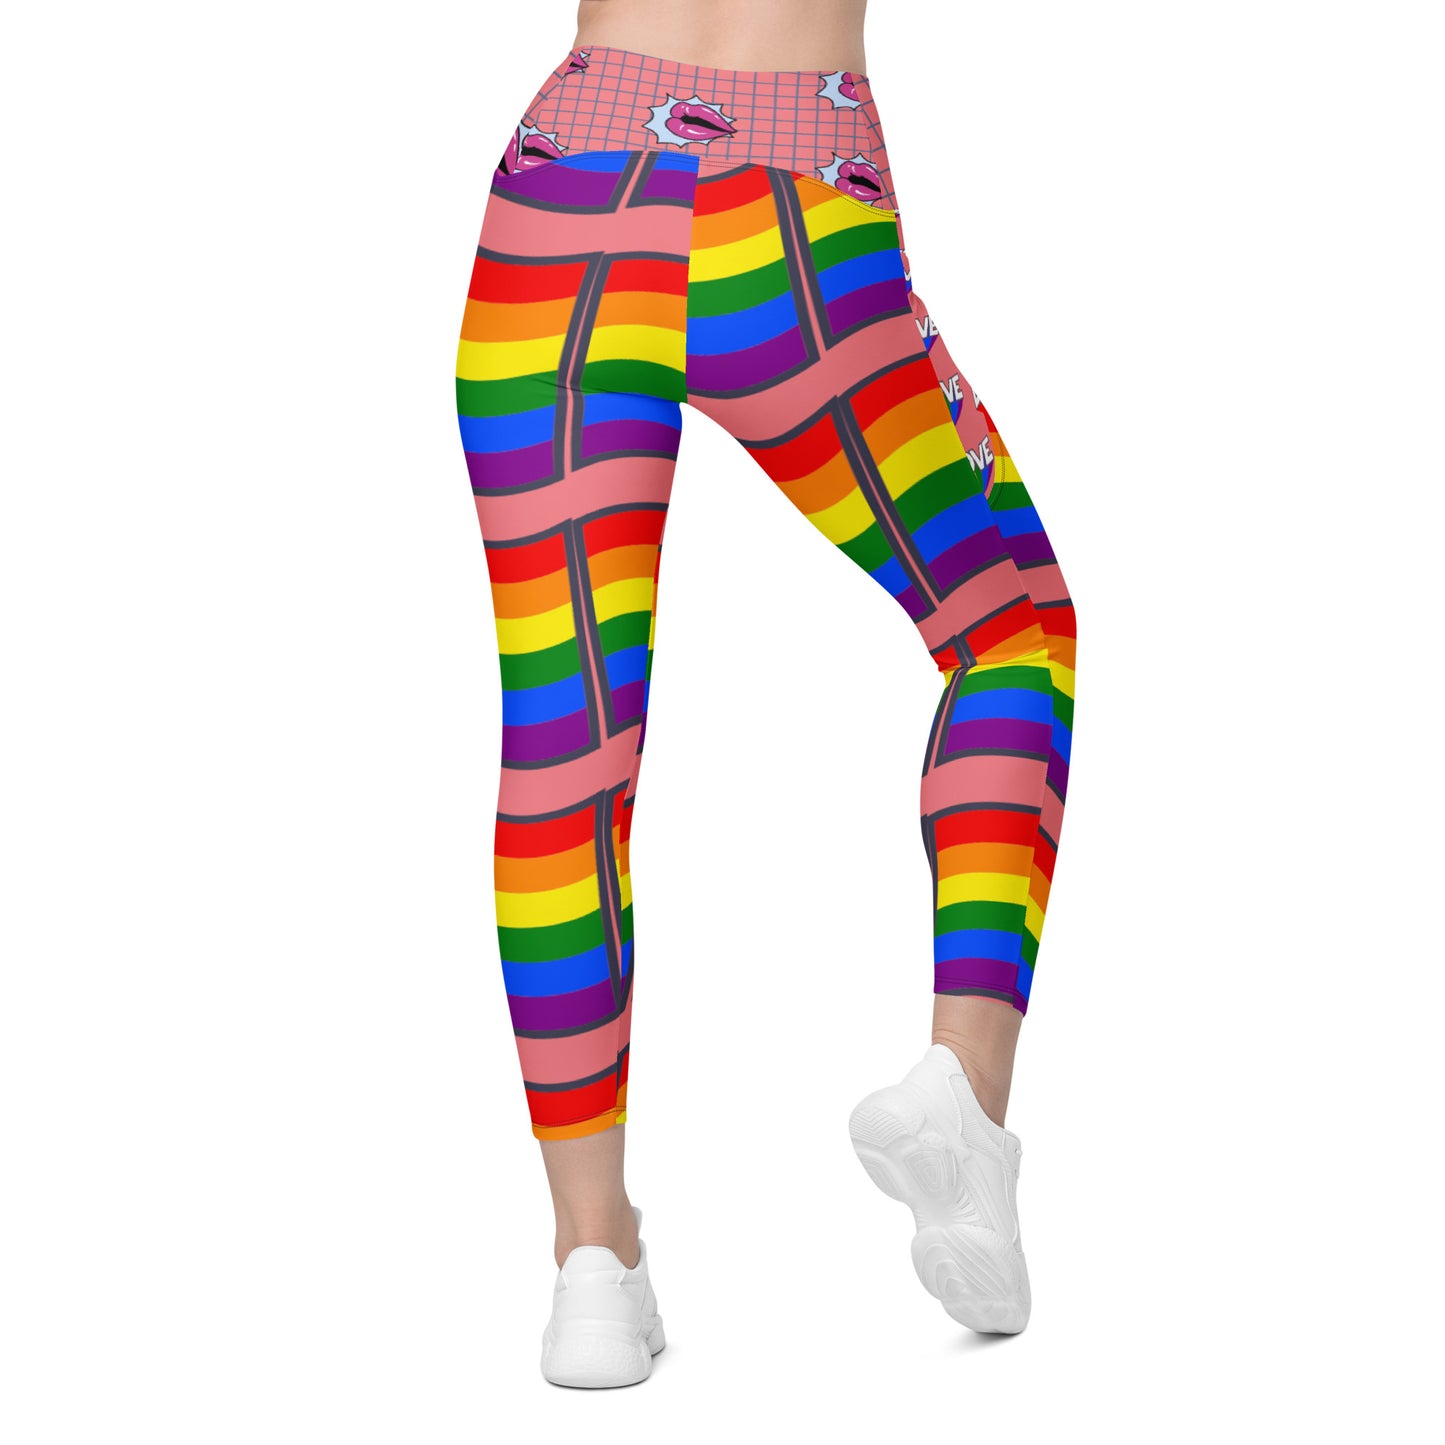 LOVE PRIDE Crossover leggings with pockets sizes 2SX-3XL